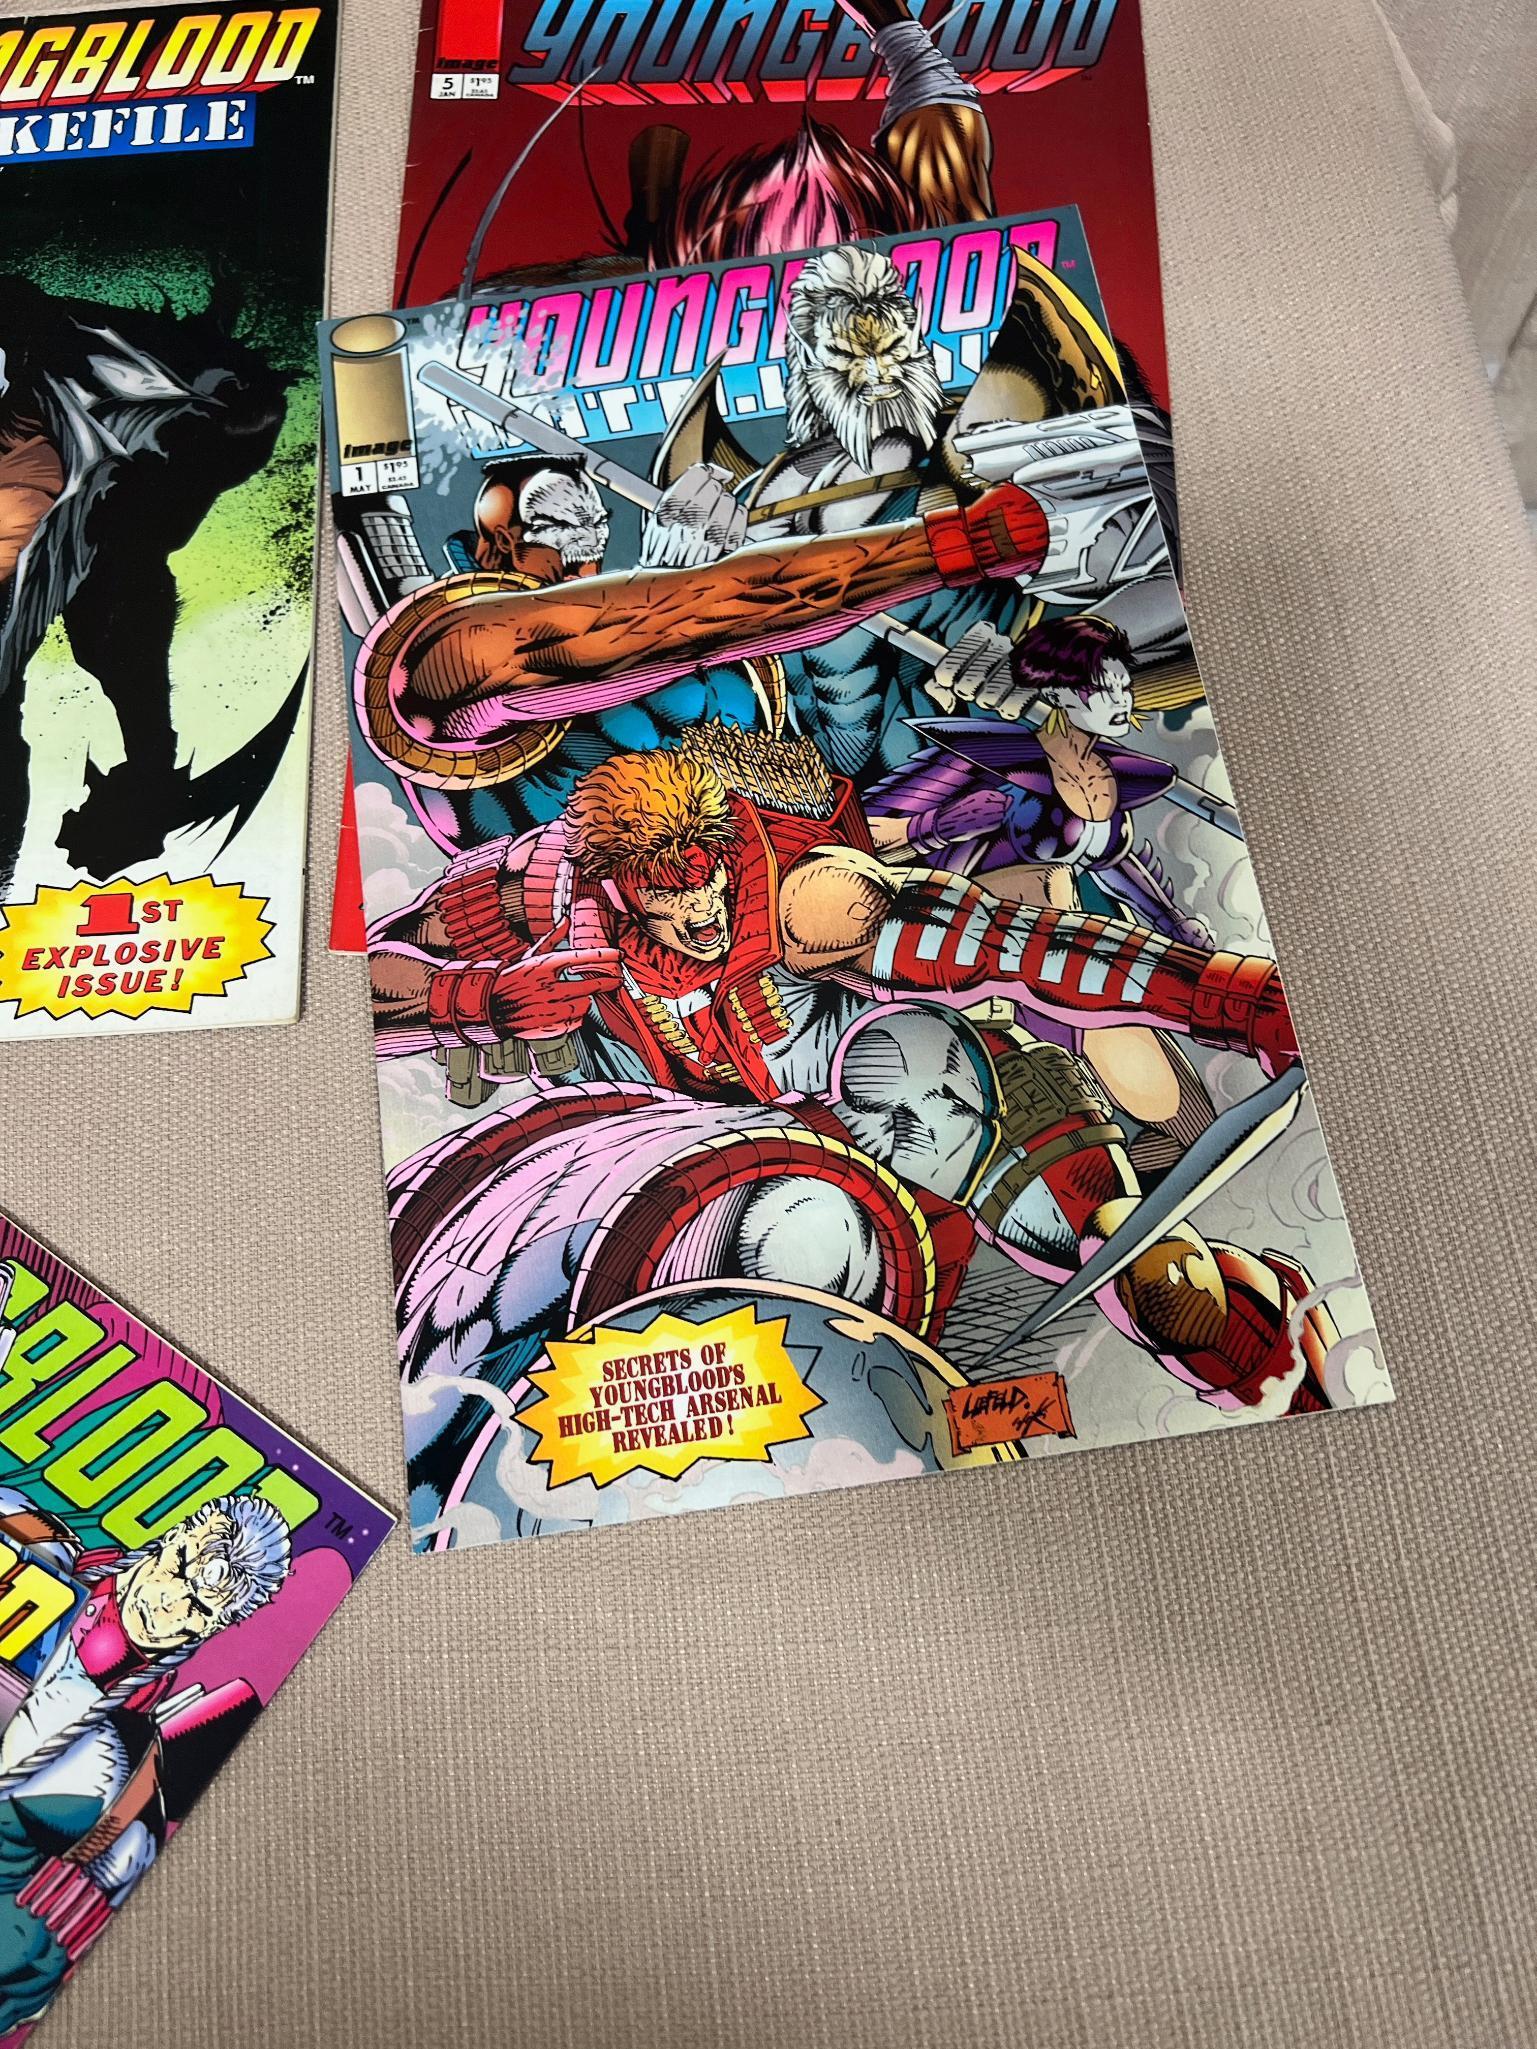 Asst. Youngblood Comics, and 6- Infinity no. 1 and 11- X-Men no. 001